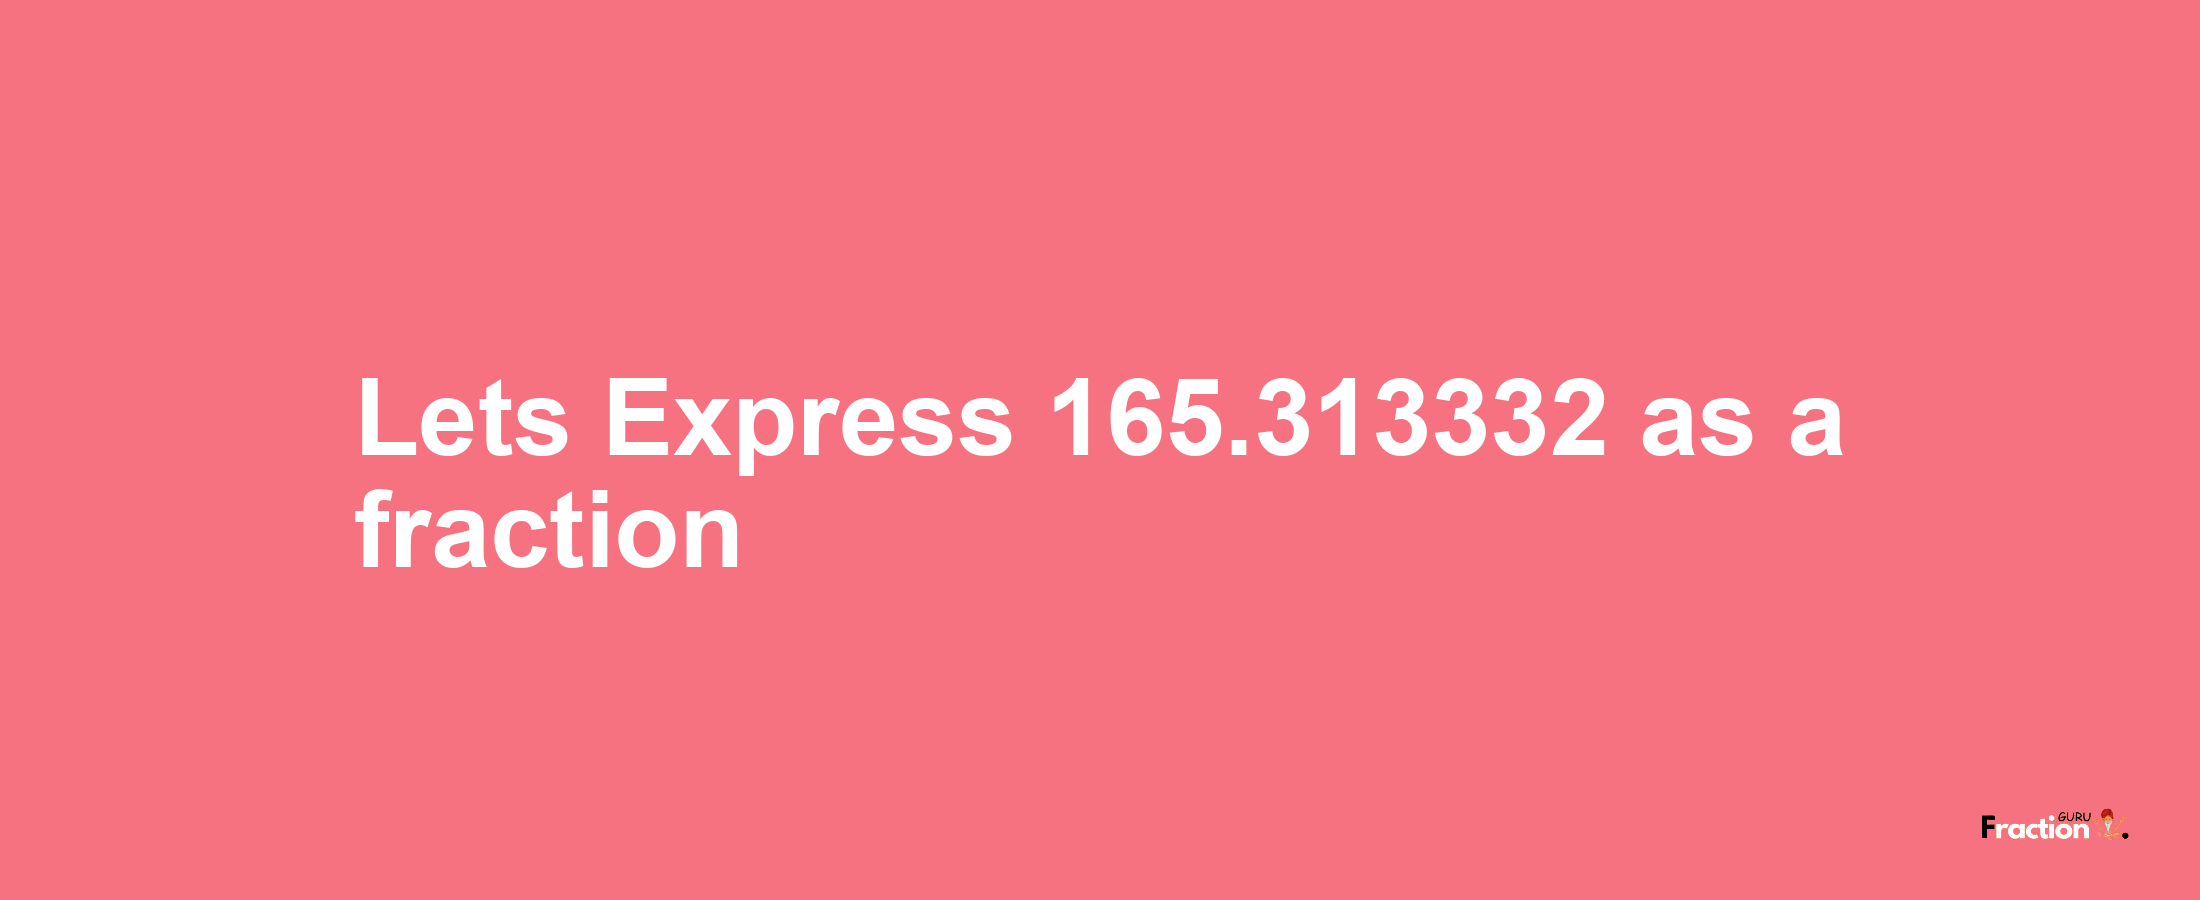 Lets Express 165.313332 as afraction